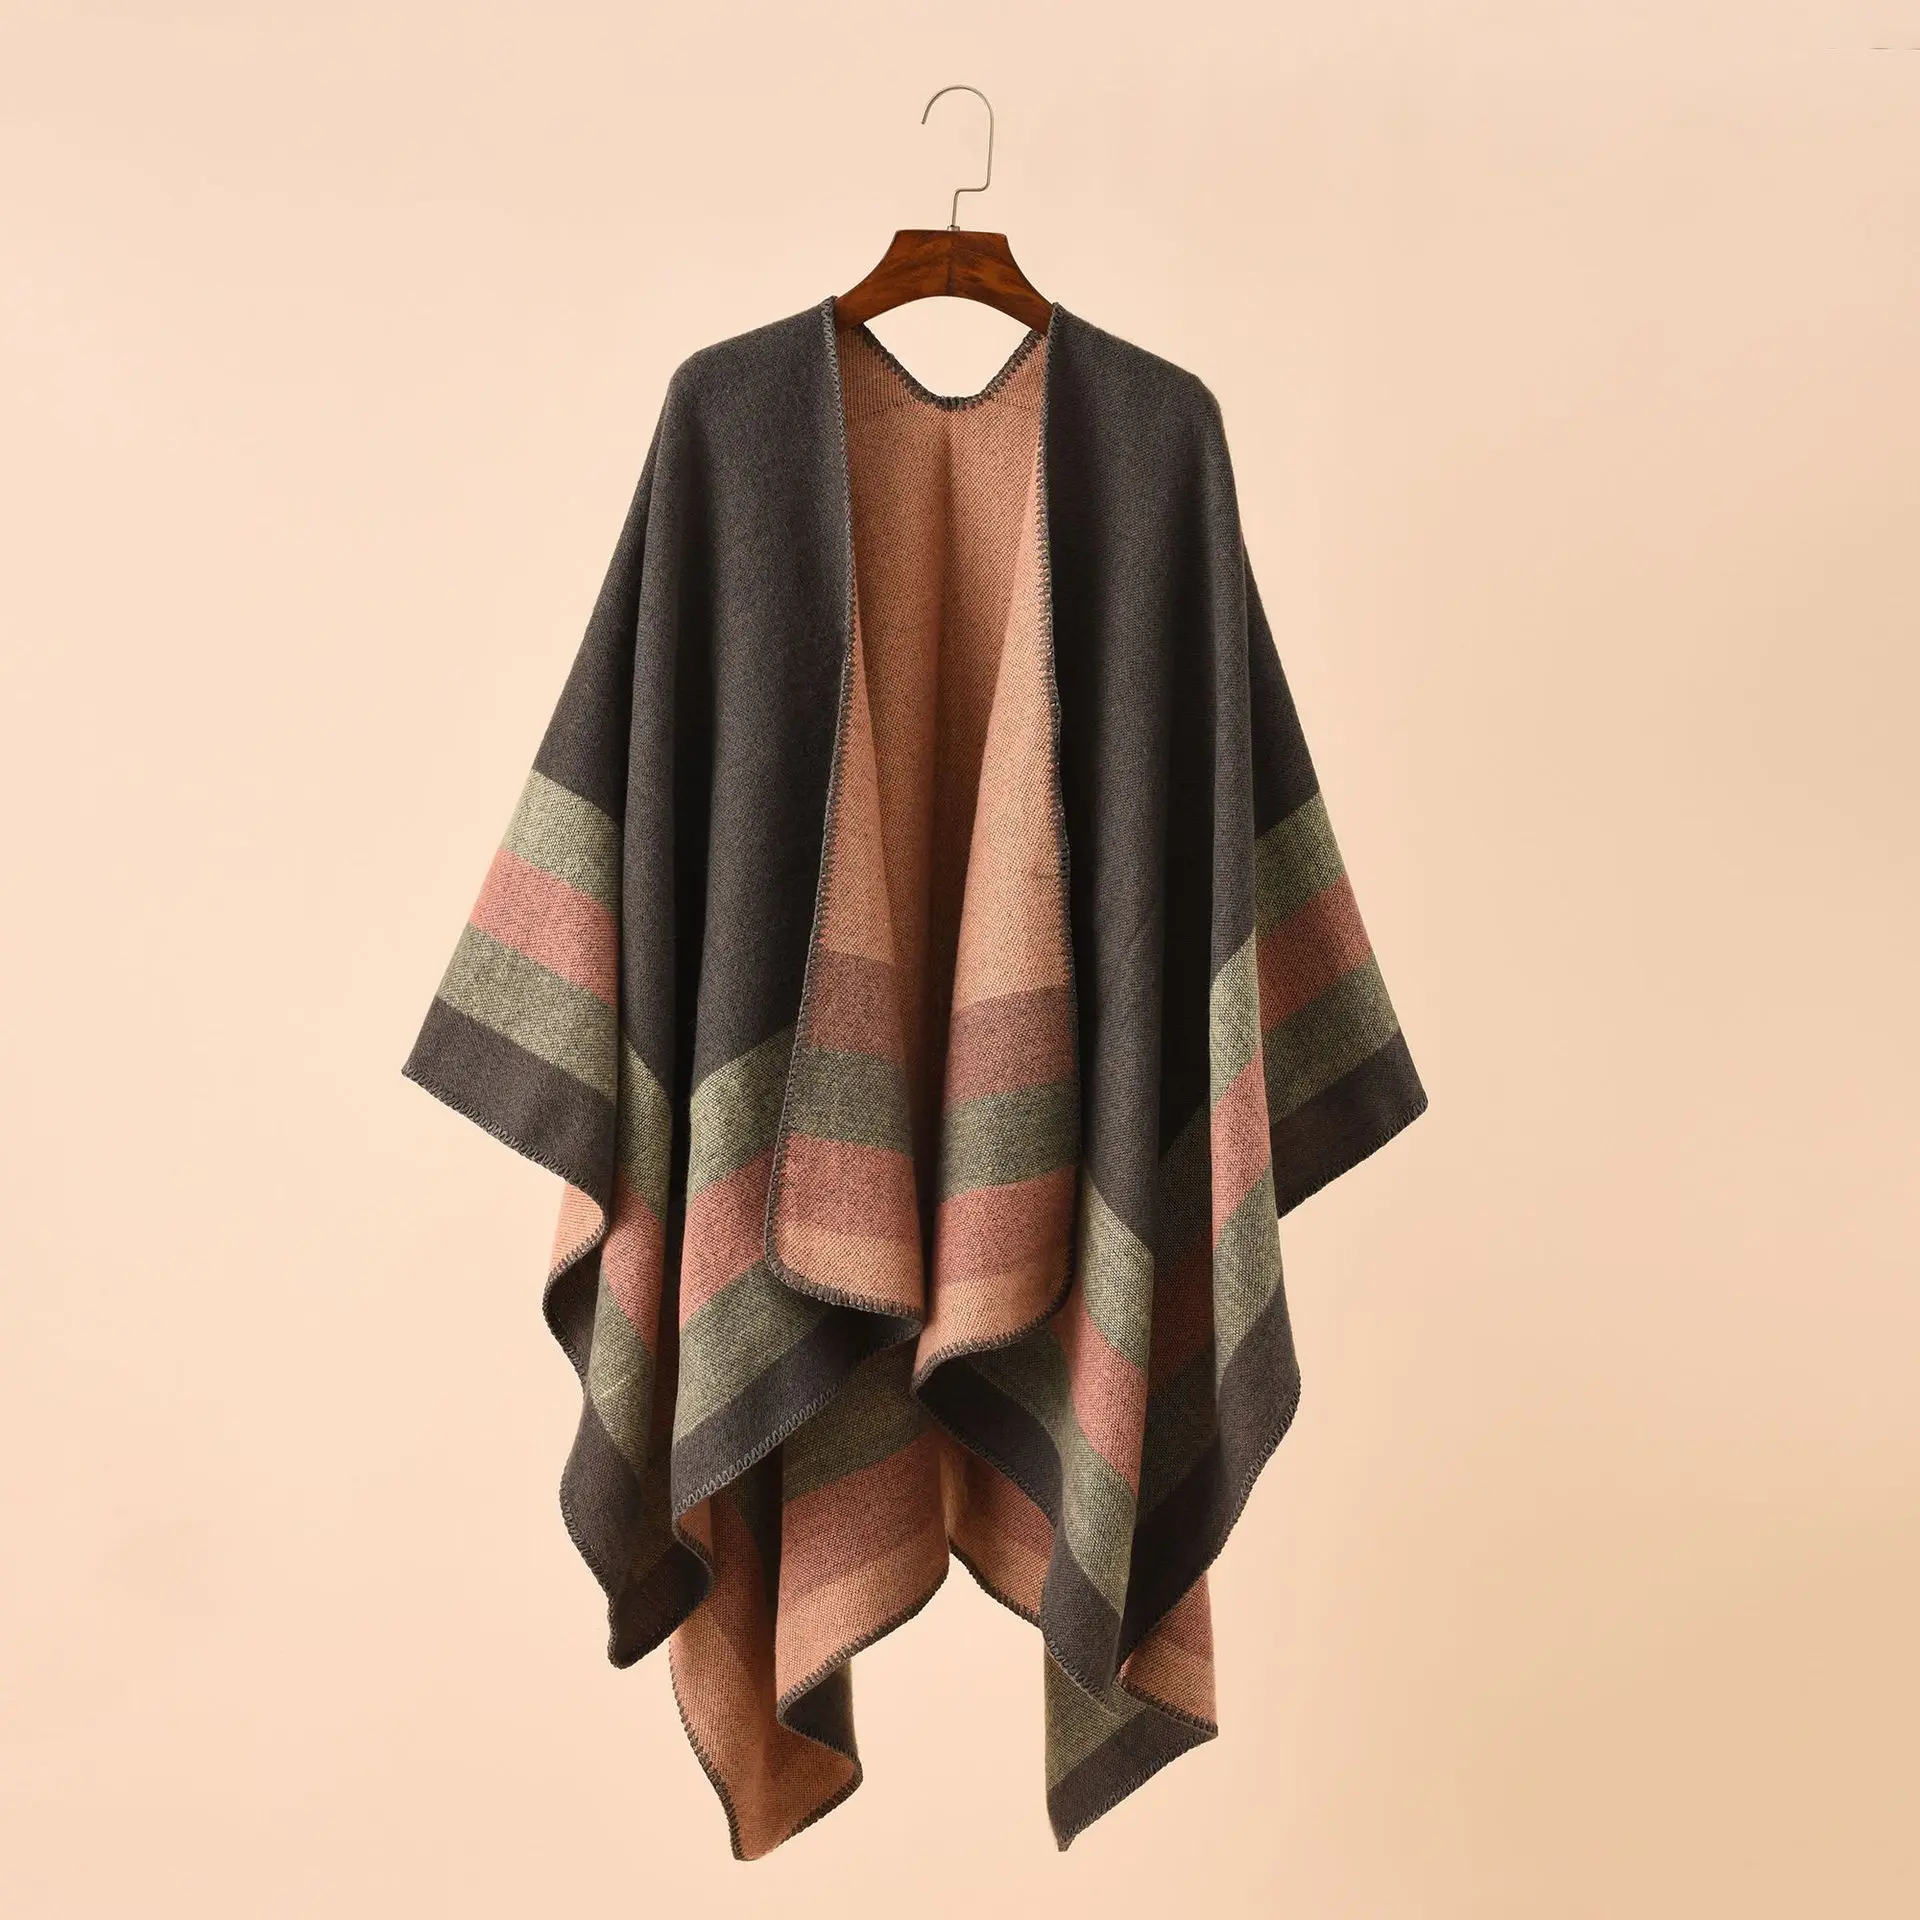 Vintage Striped Floral Poncho for Women Warm Faux Cashmere Shawl Color Blocking Travel and Play Elegant Winter women s striped small square faux cashmere acrylic warm air conditioning shawl sunshade sun cape travel cape